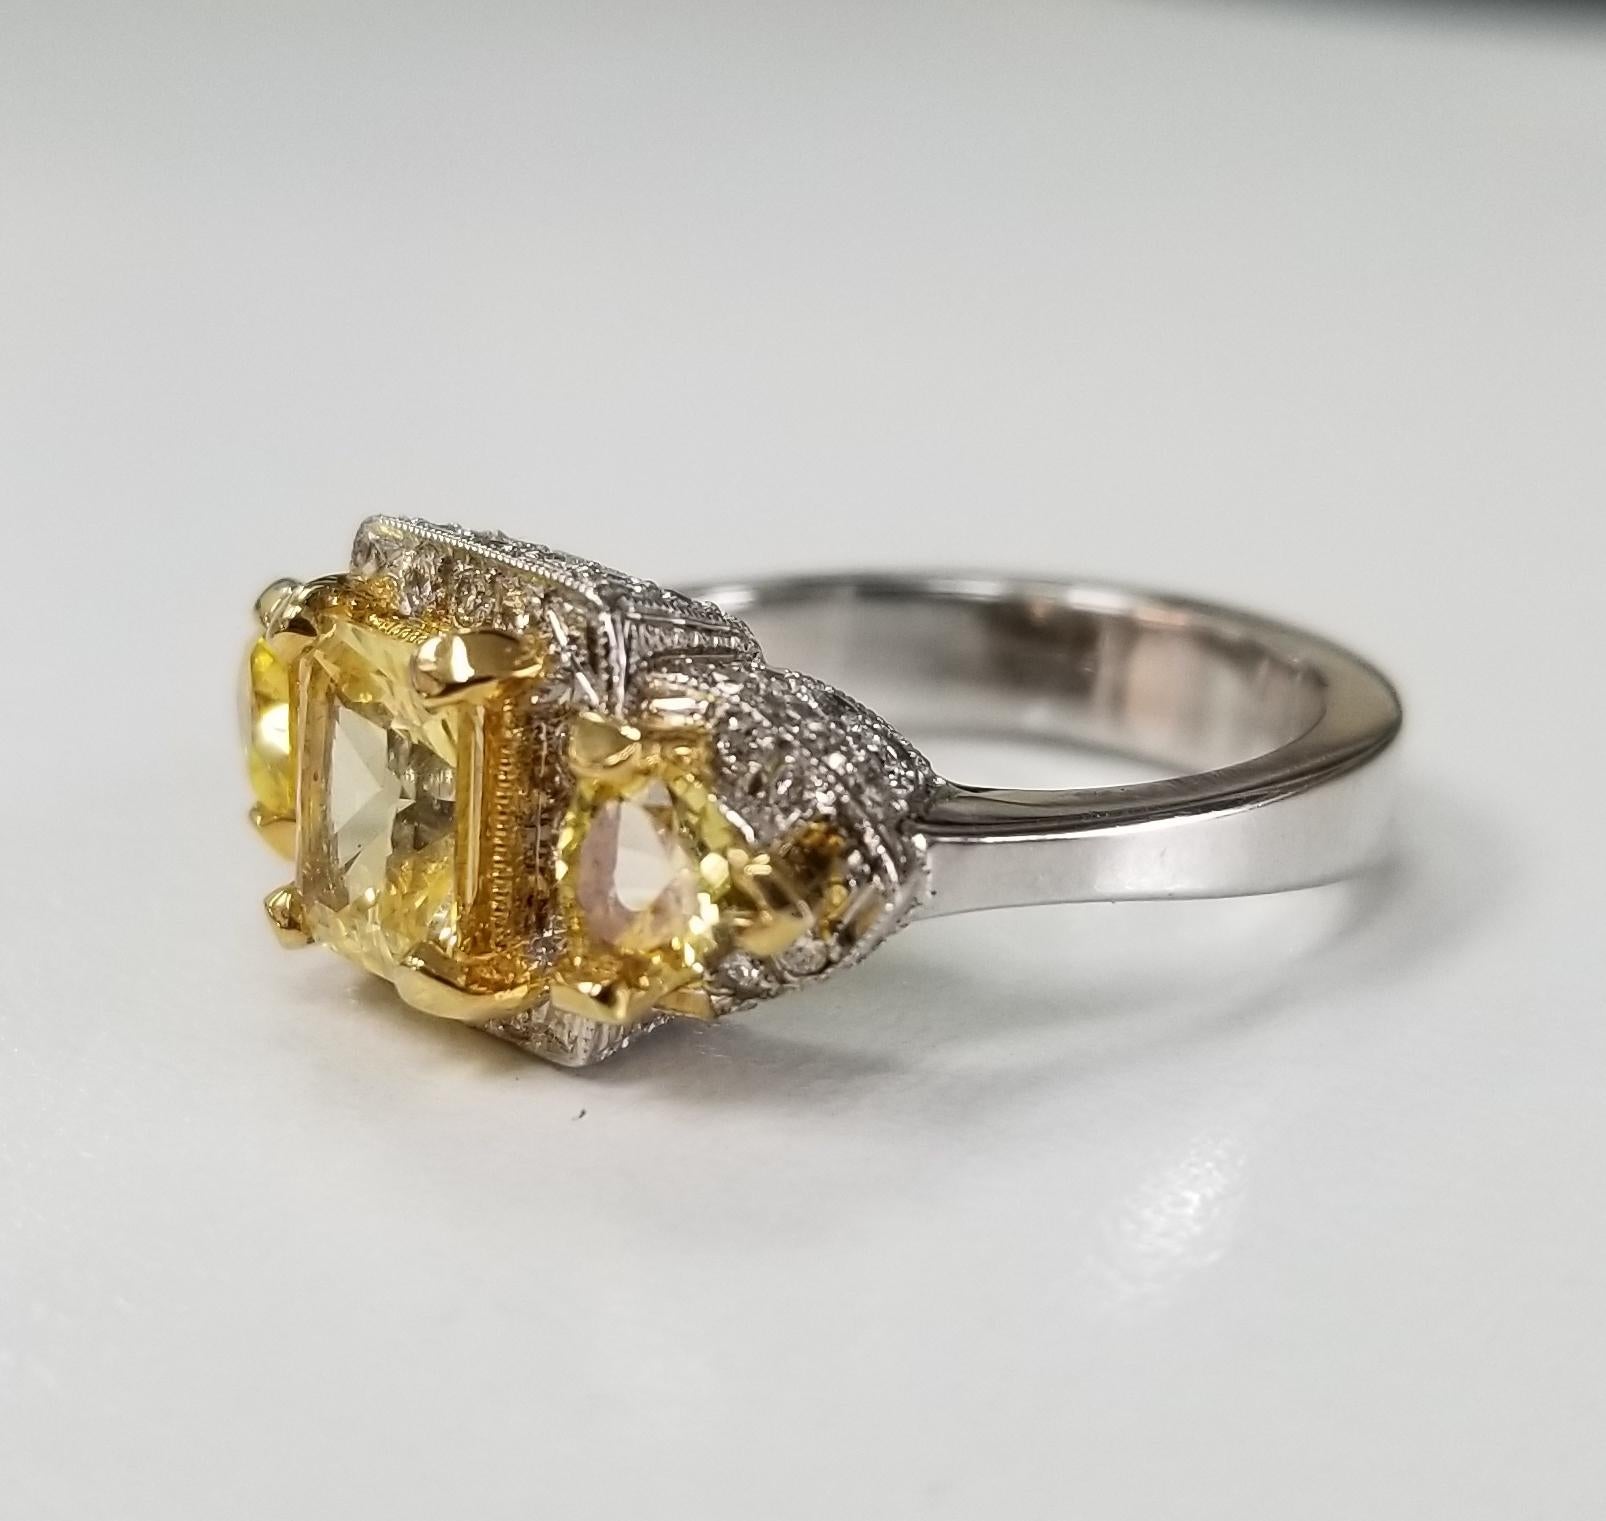 14k white gold yellow sapphire halo and diamond ring, containing 1 radiant cut weighing 1.22cts. , 2 trillion cut yellow sapphires weighing .74pts. all of very fine quality and 58 round full cut diamonds of very fine quality weighing .55pts.  This